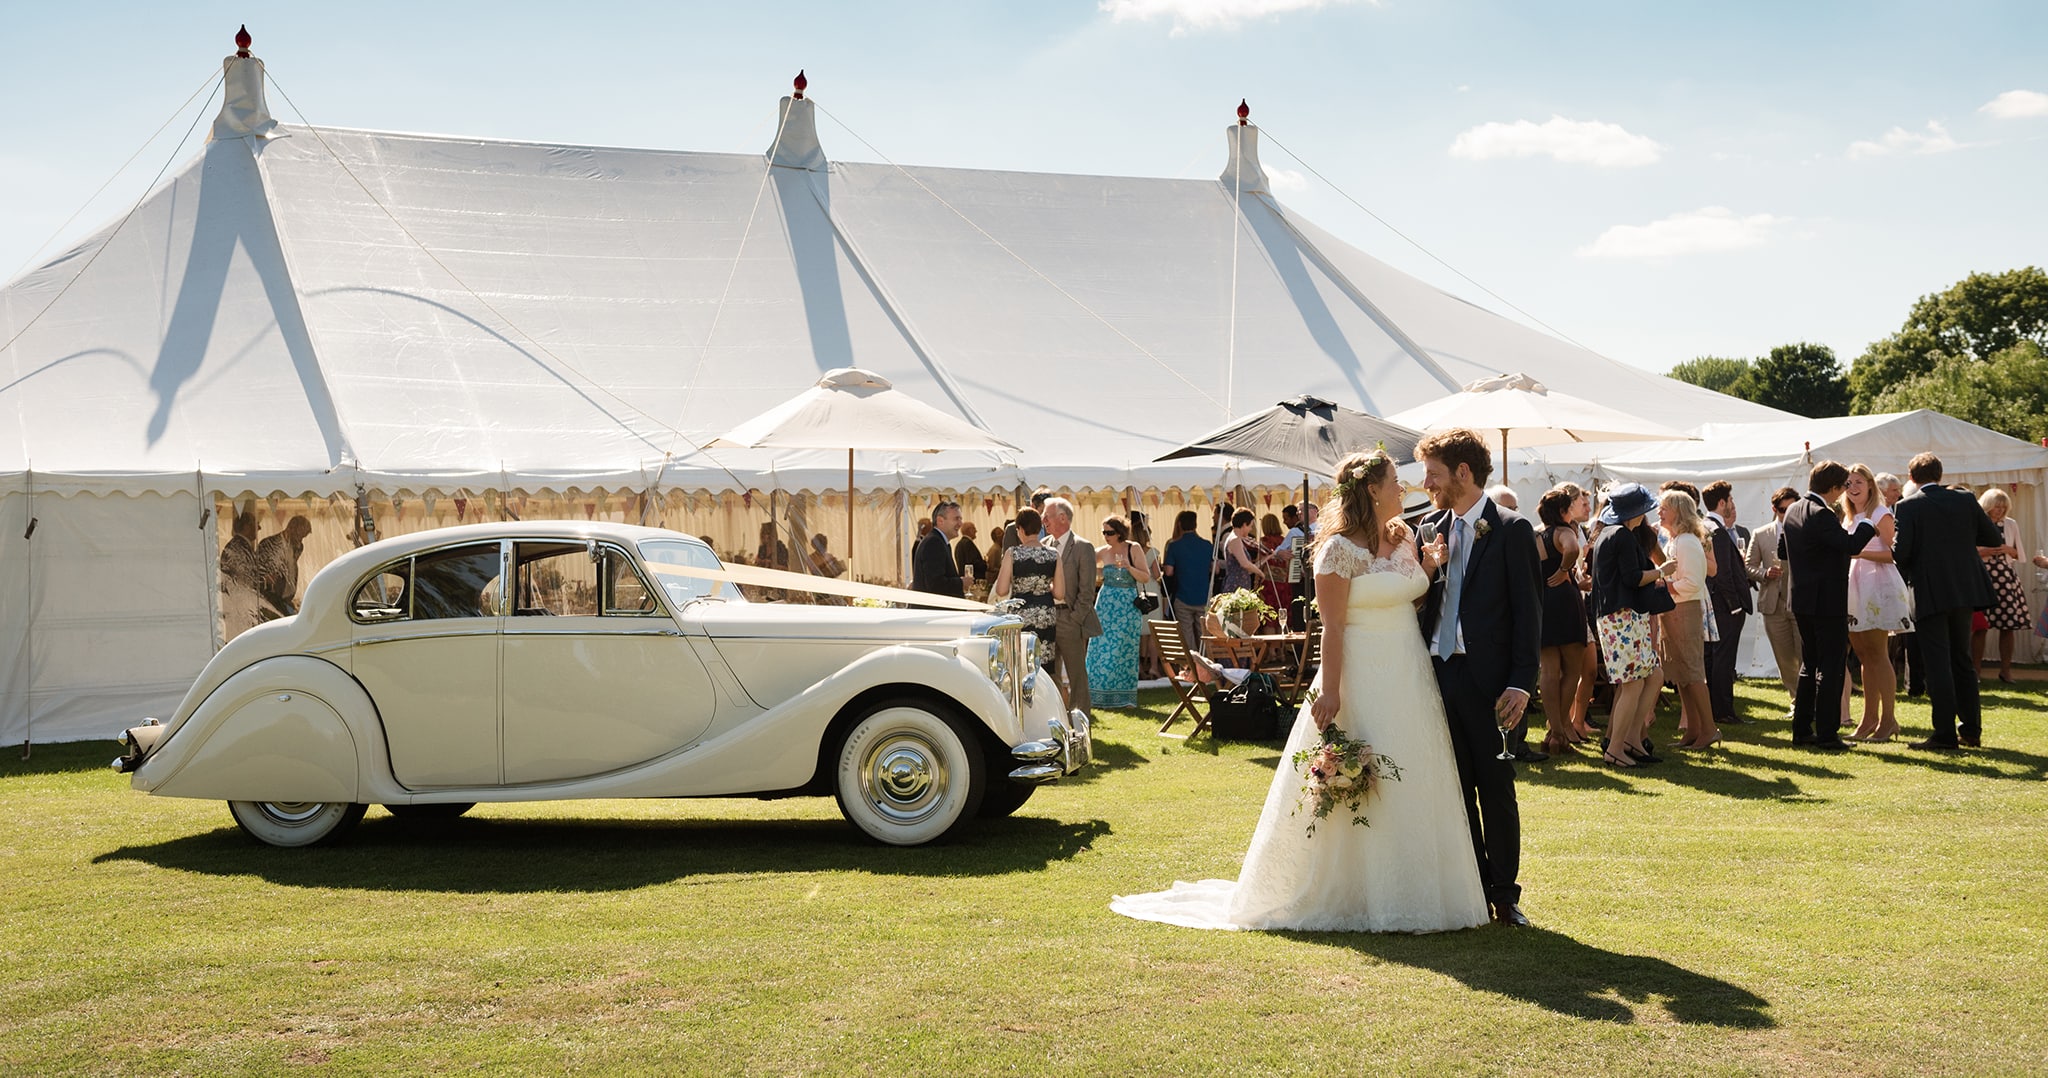 View of couple and wedding car against backdrop of relaxed marquee wedding